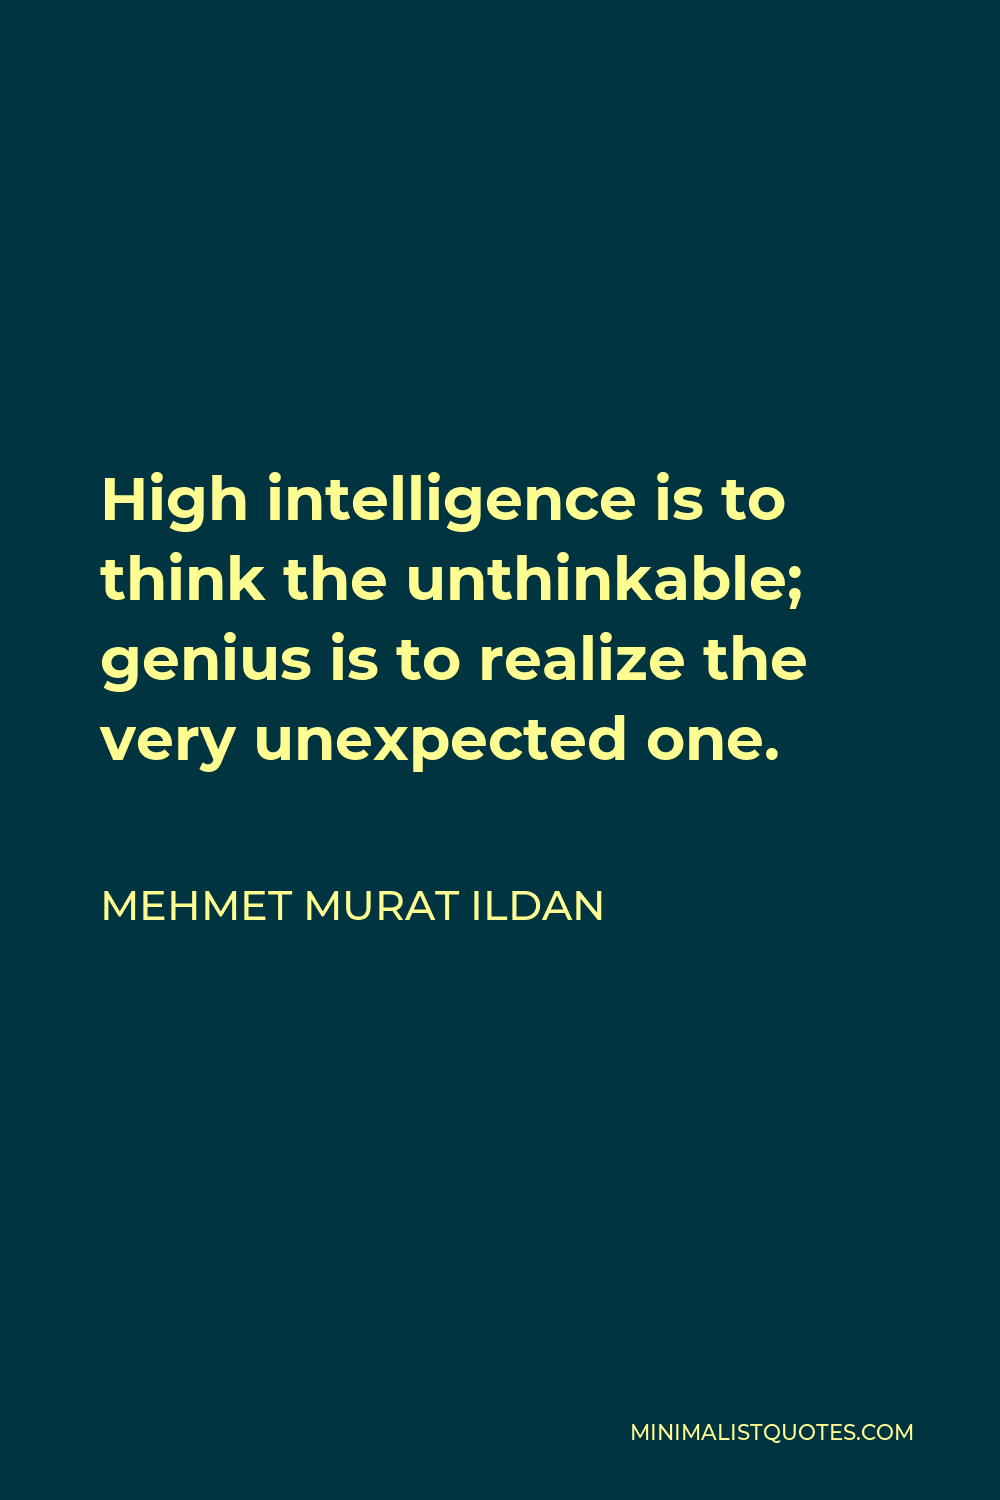 Mehmet Murat Ildan Quote - High intelligence is to think the unthinkable; genius is to realize the very unexpected one.